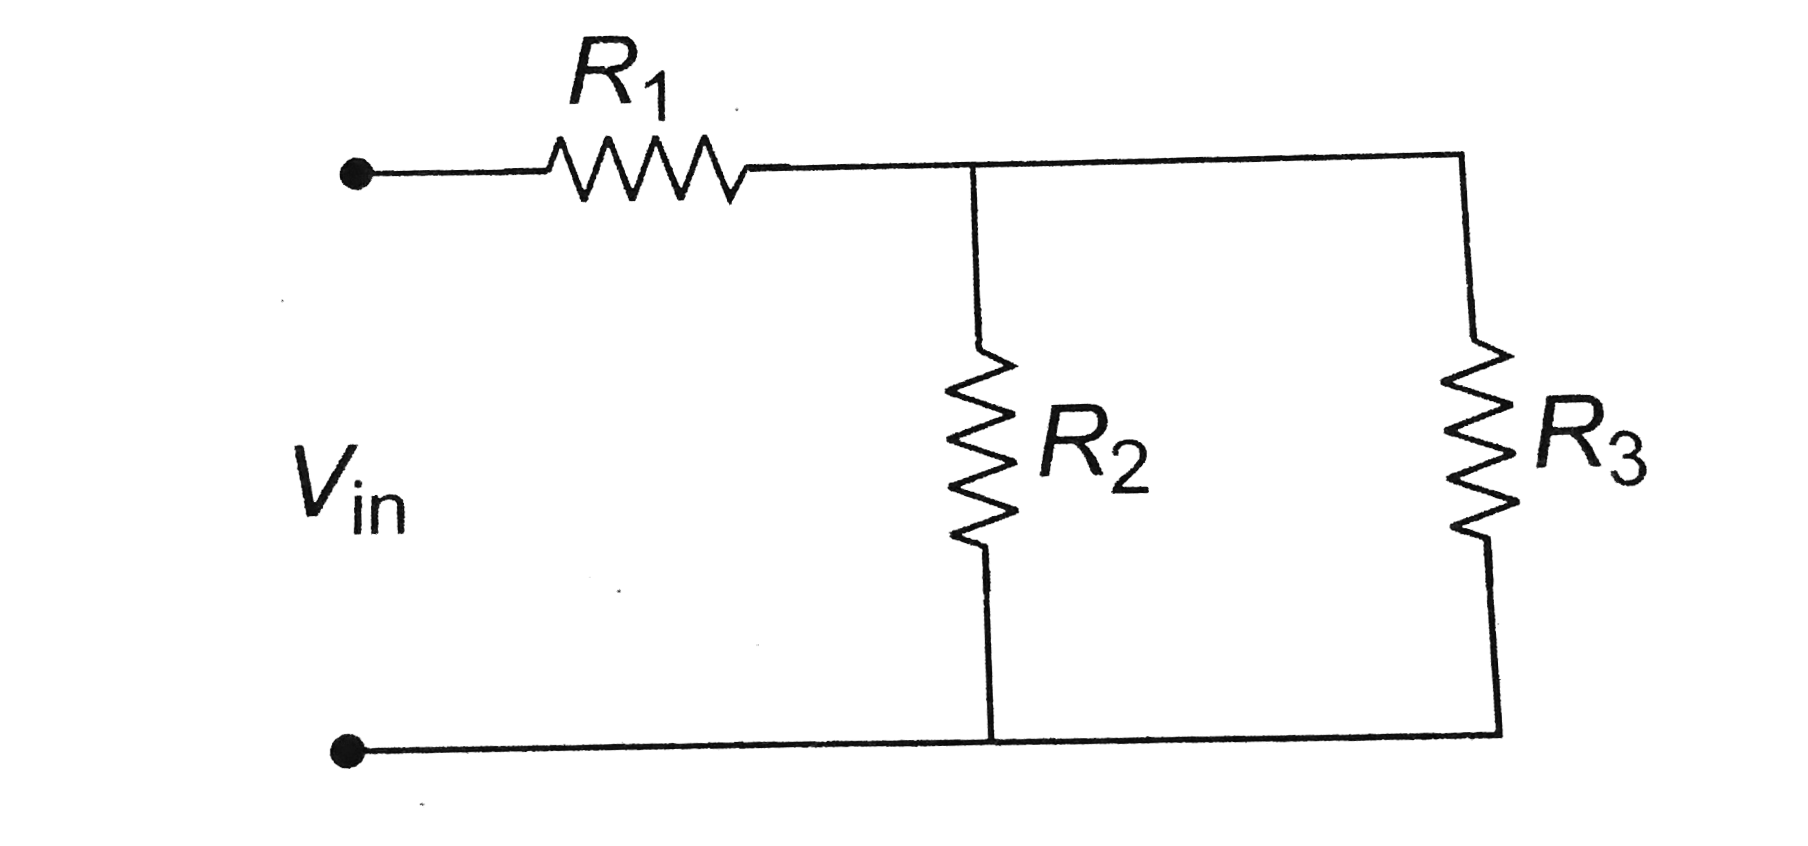 For ensuring dissipation of same energy in all three resistors (R(1), R(2), R(3)) connected as shown in figure, their values must be related s